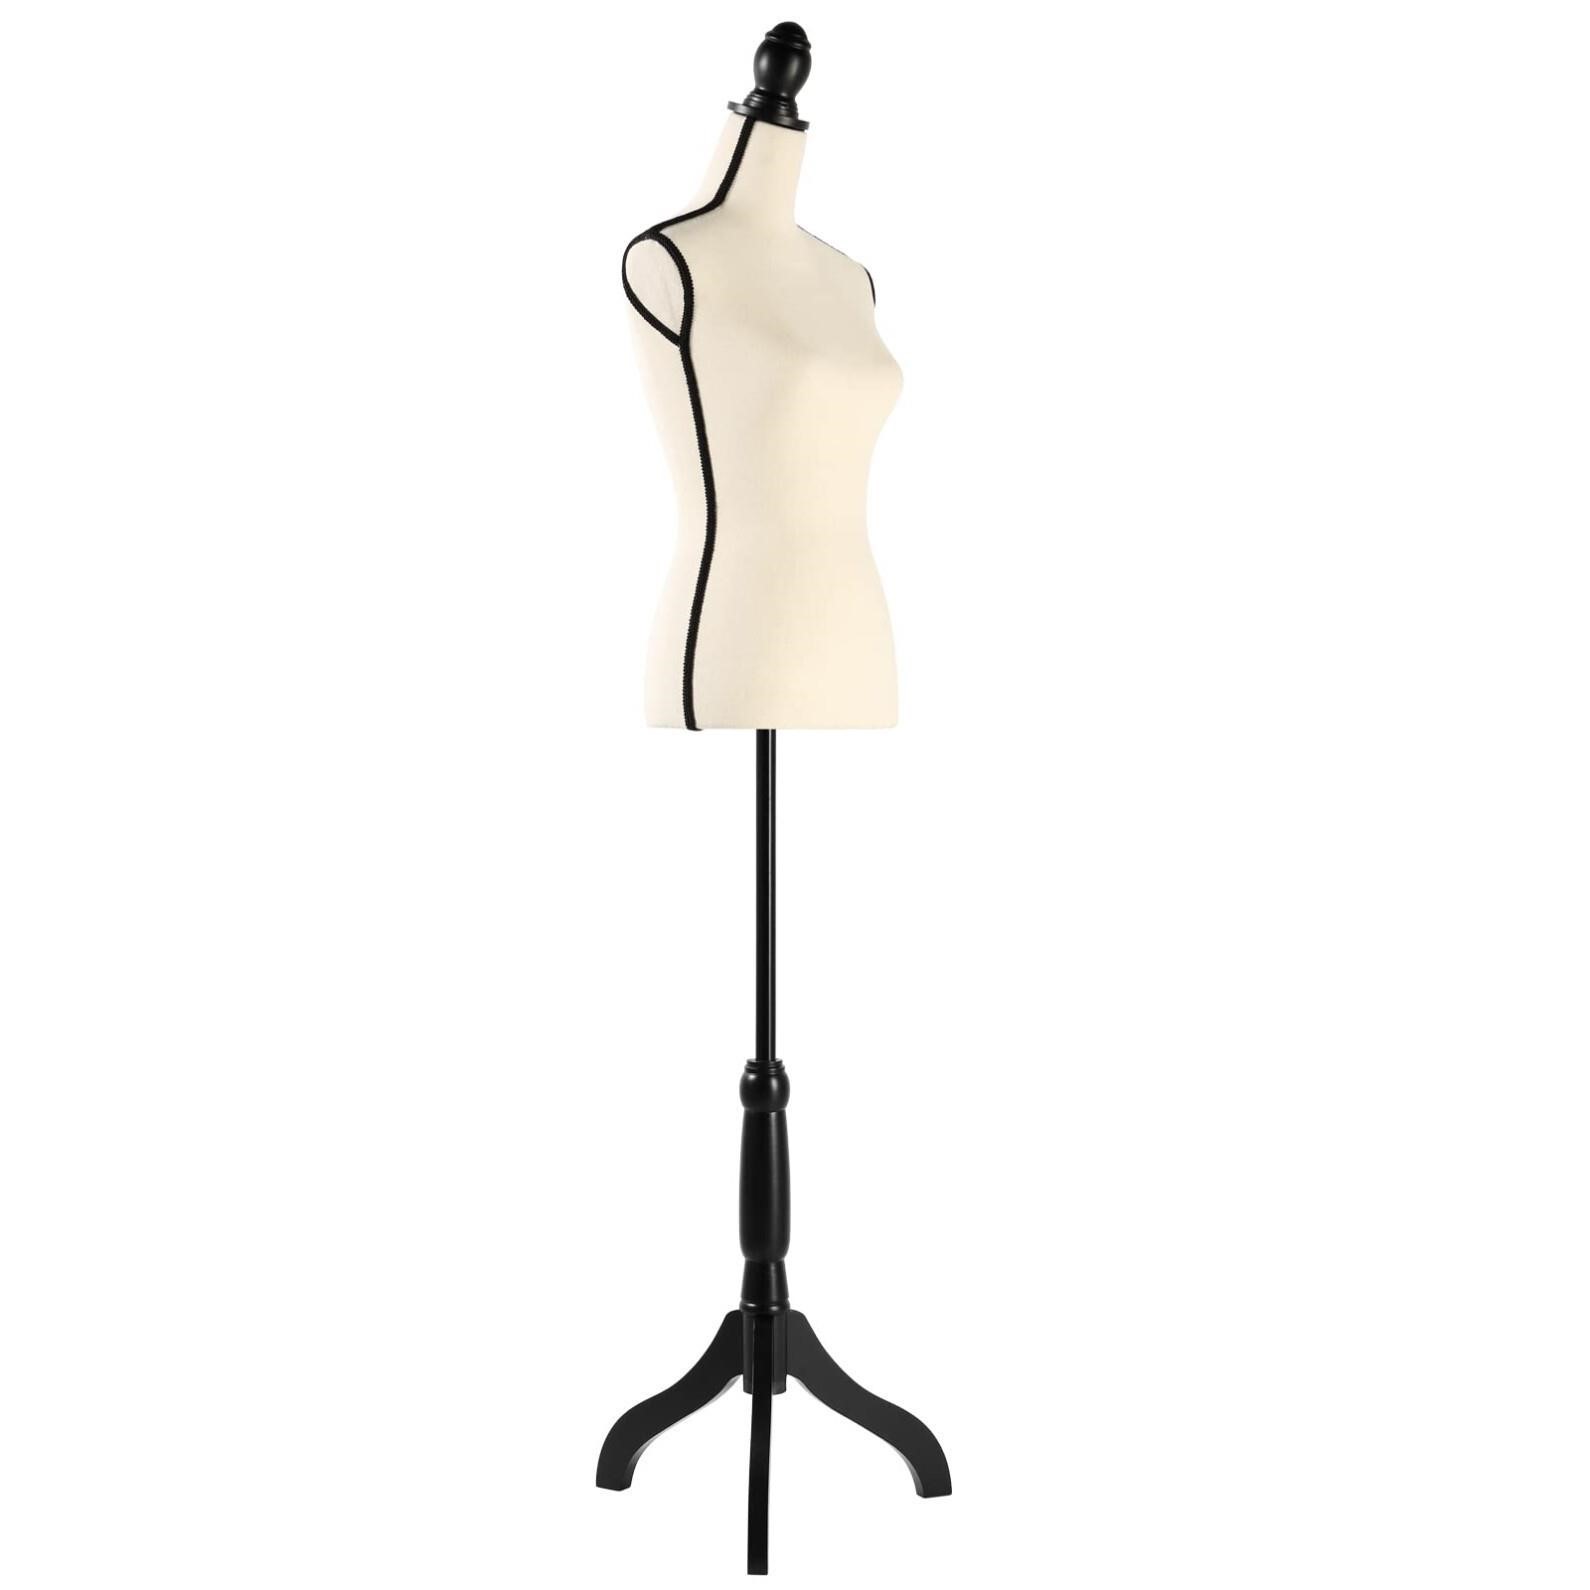 DRDINGRUI Female Mannequin Torso with Stand, Heigh